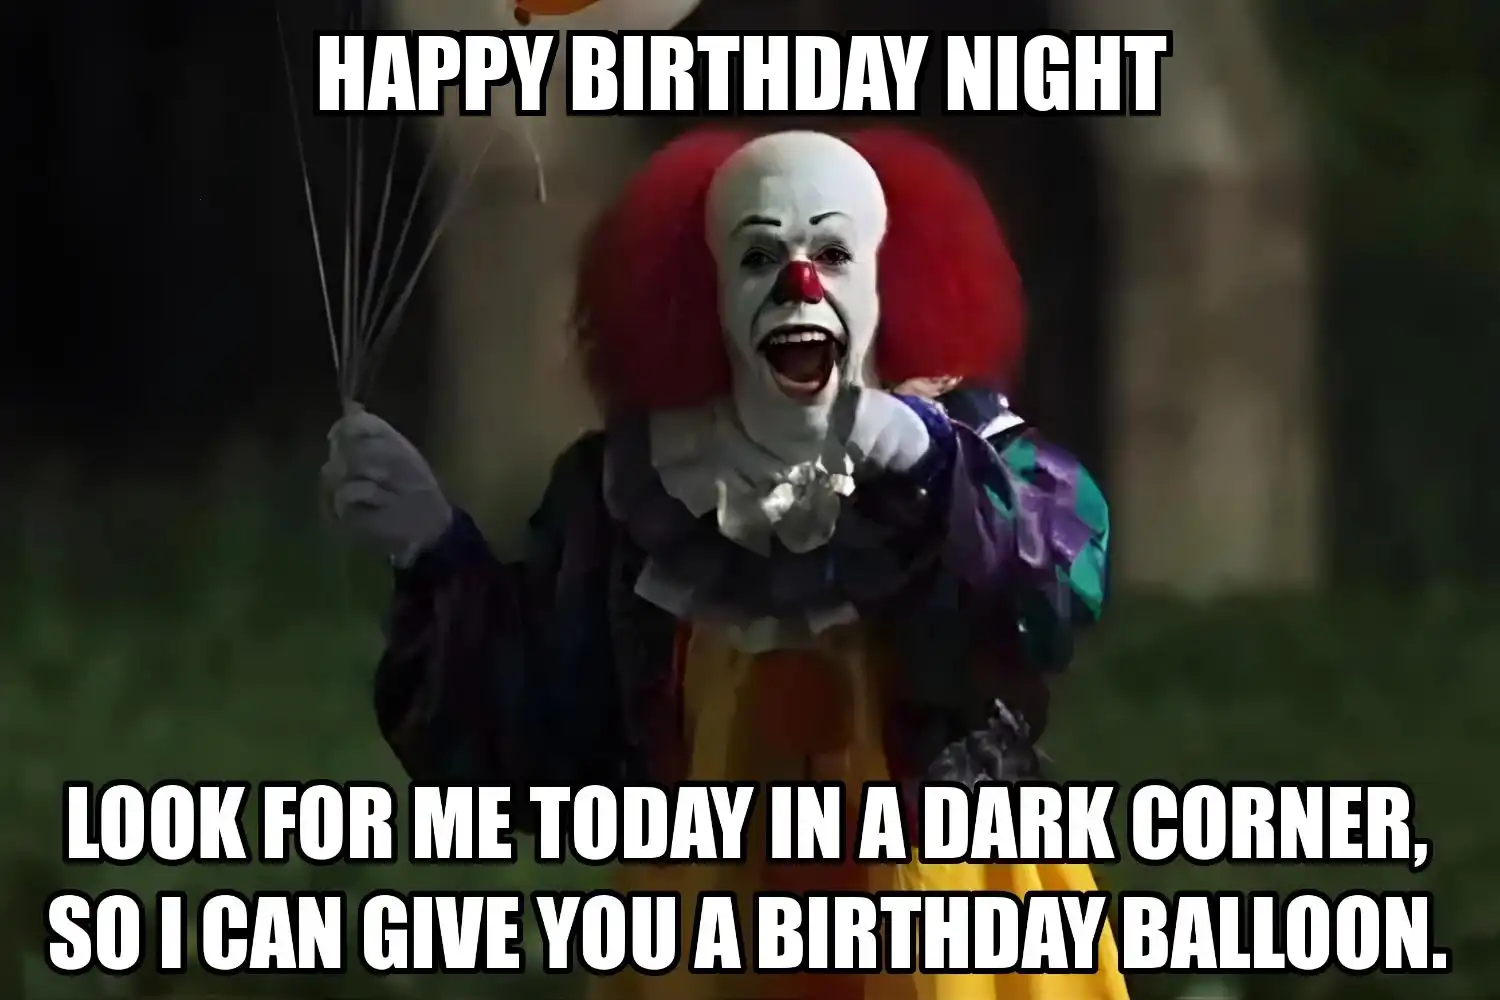 Happy Birthday Night I Can Give You A Balloon Meme